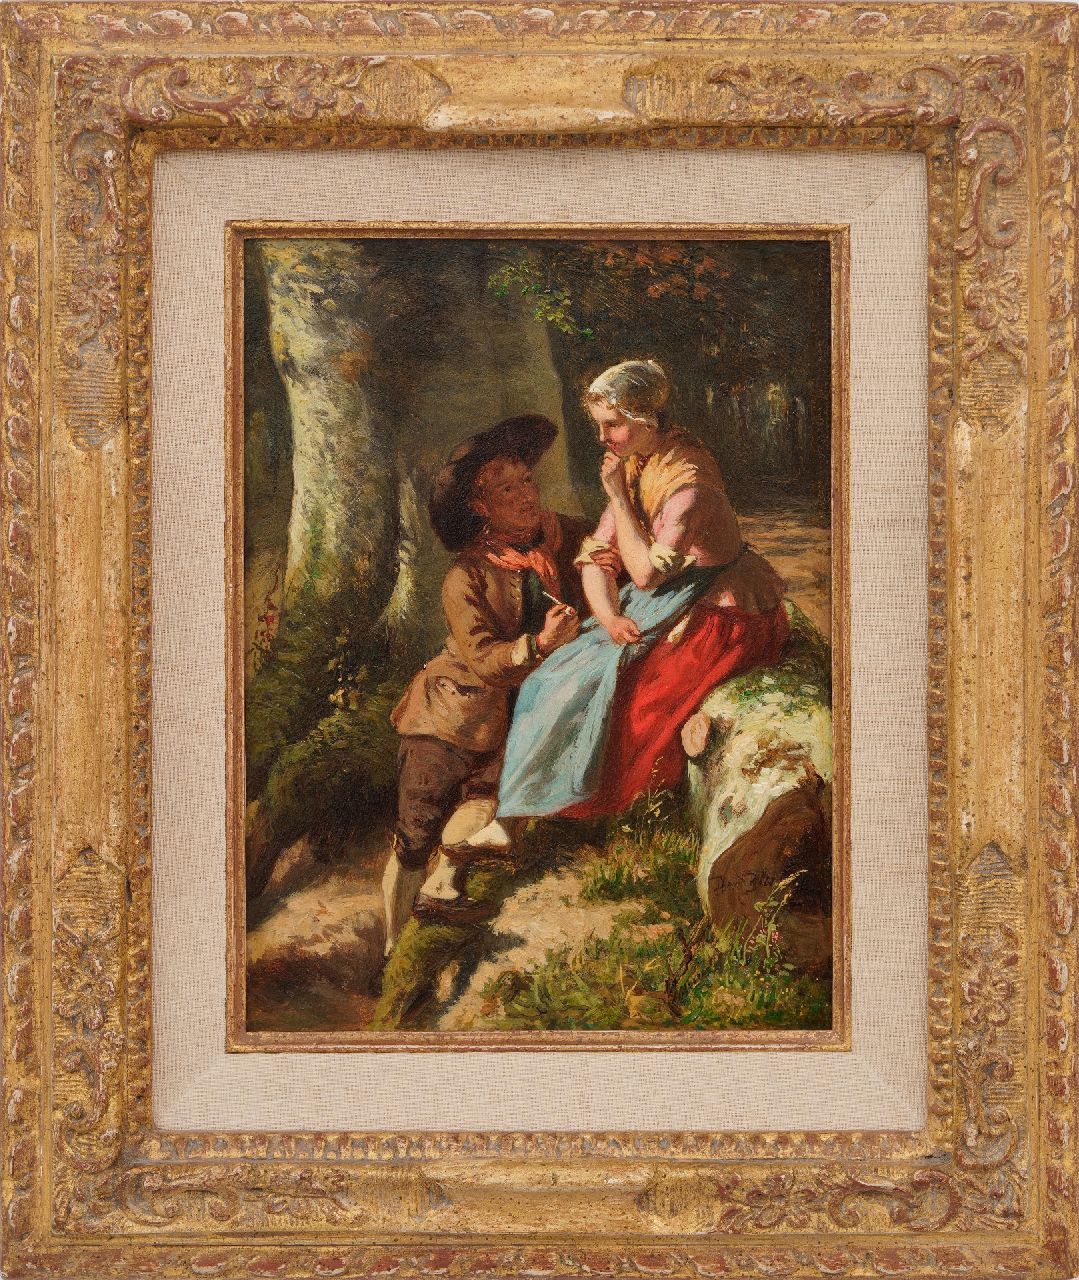 Bles D.J.  | David Joseph Bles | Paintings offered for sale | The suitor, oil on panel 25.1 x 18.5 cm, signed l.r.